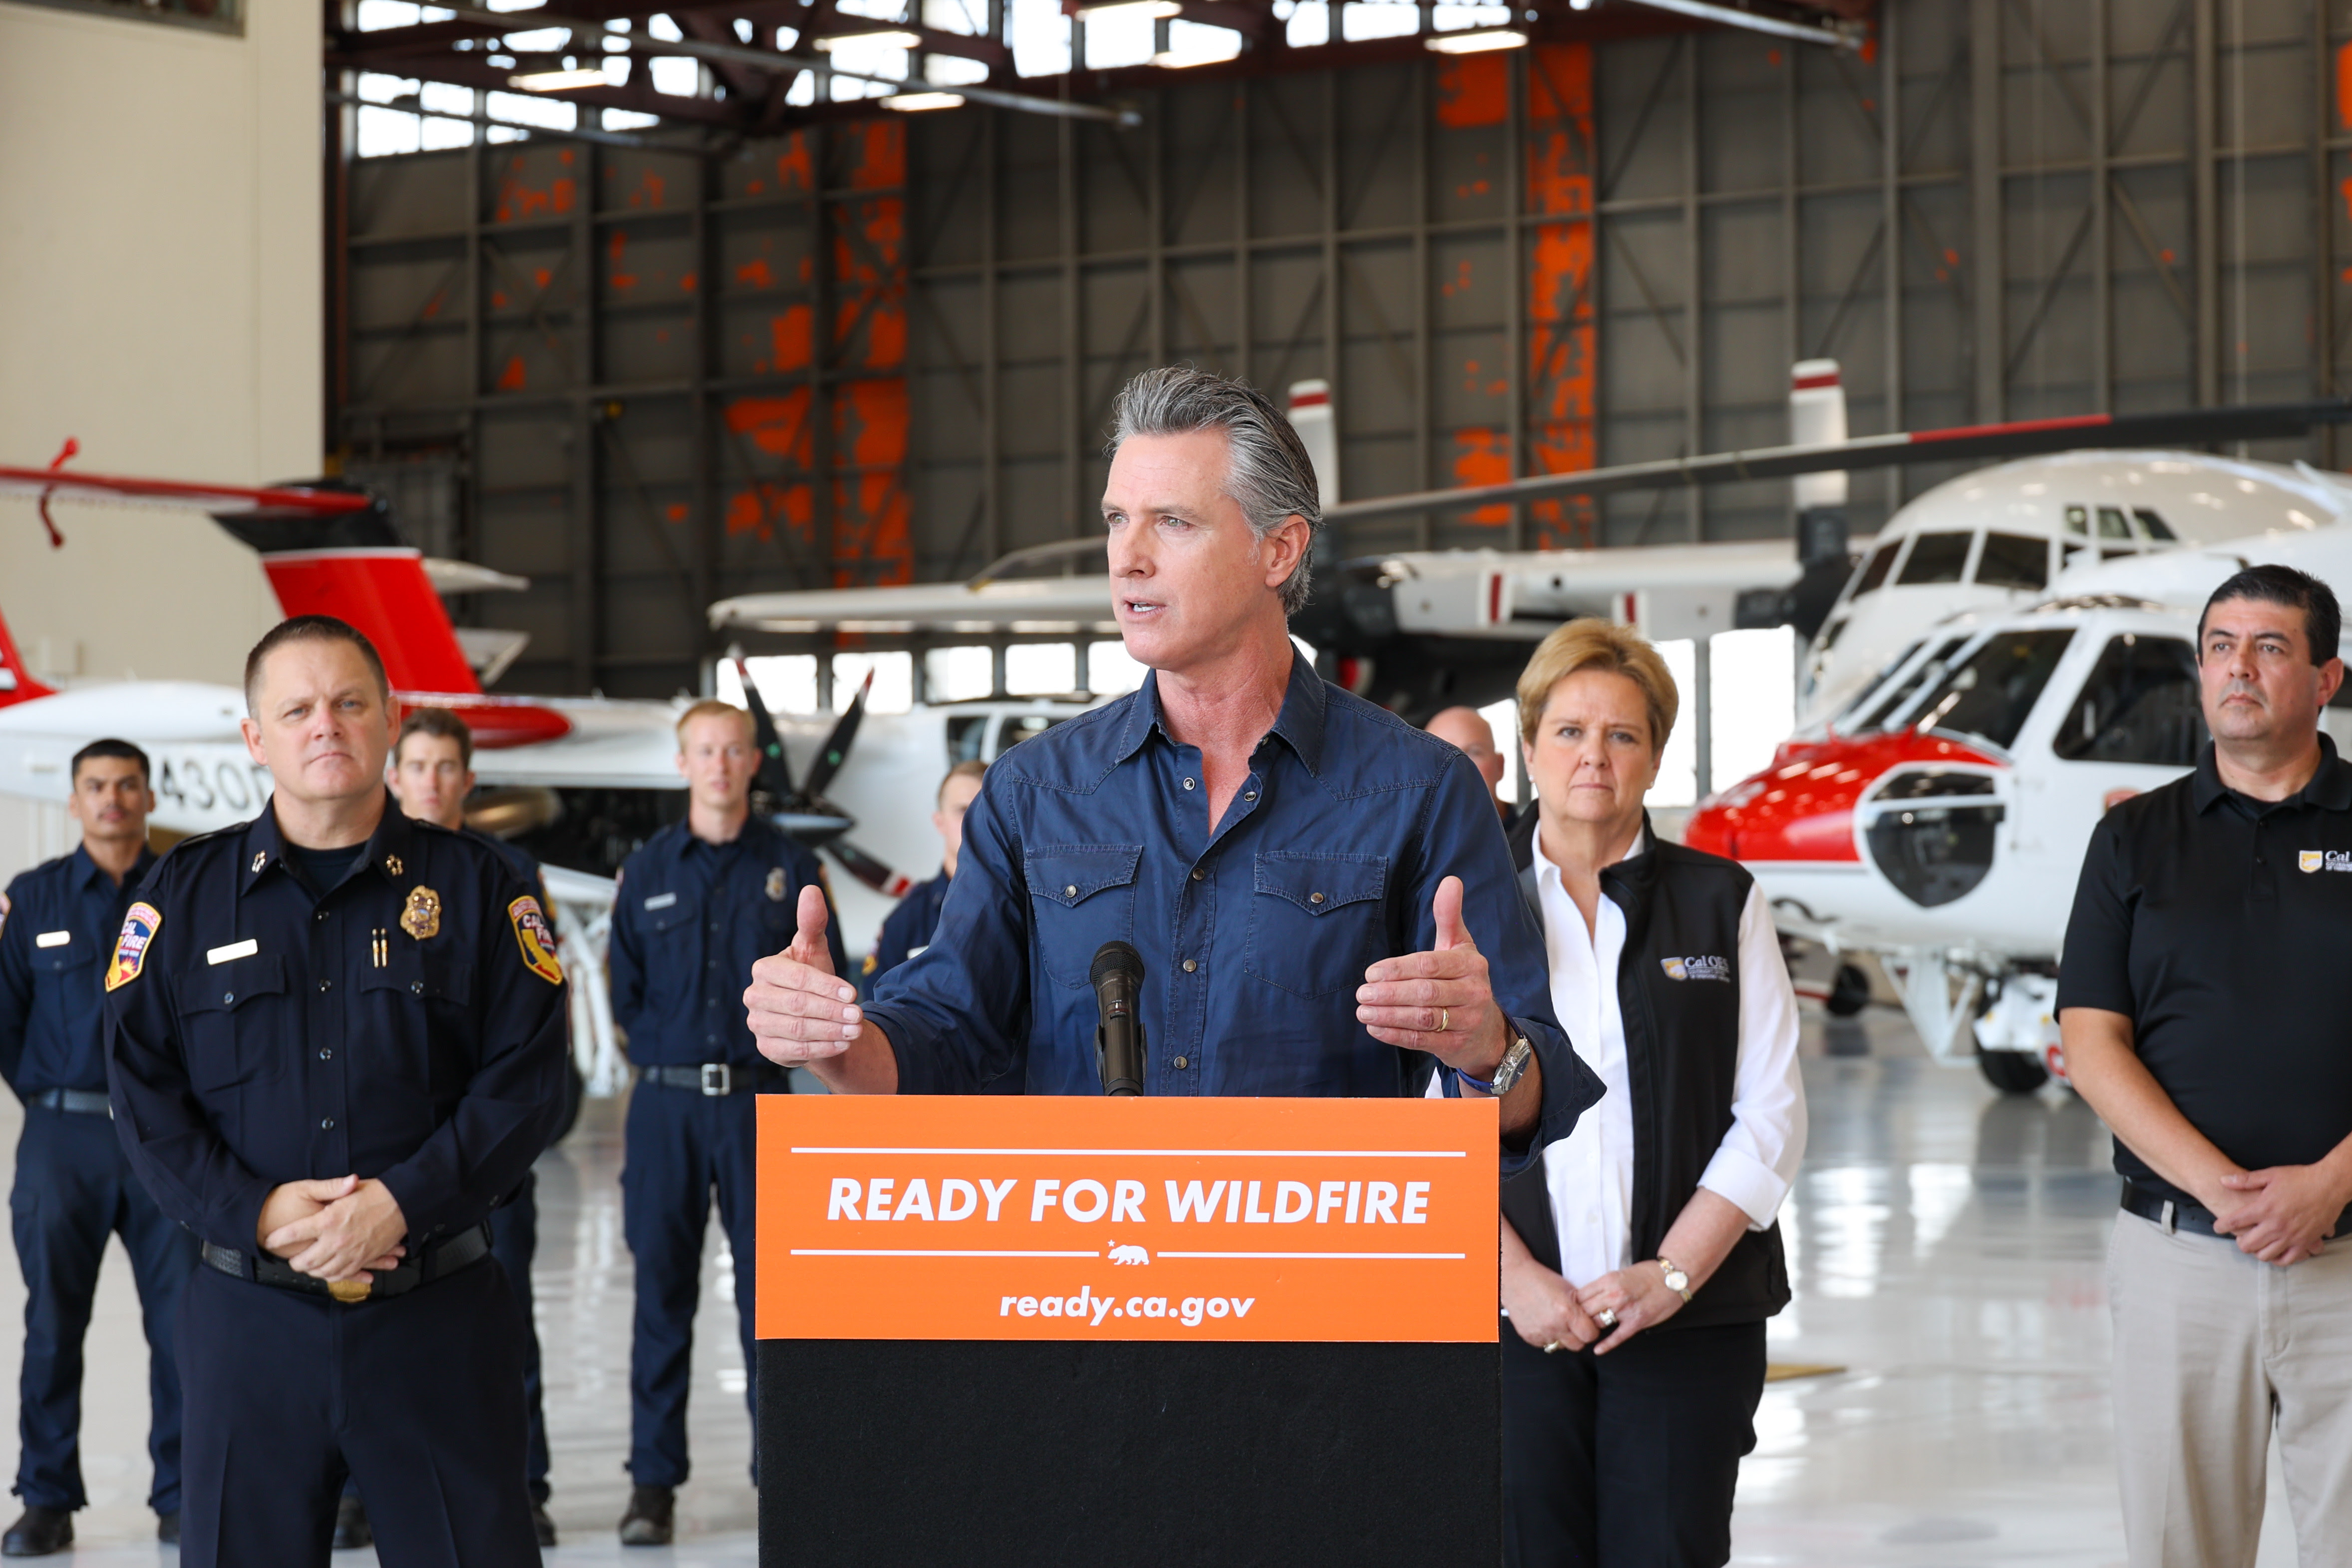 Governor Newsom and fire officials highlight California’s wildfire readiness and response